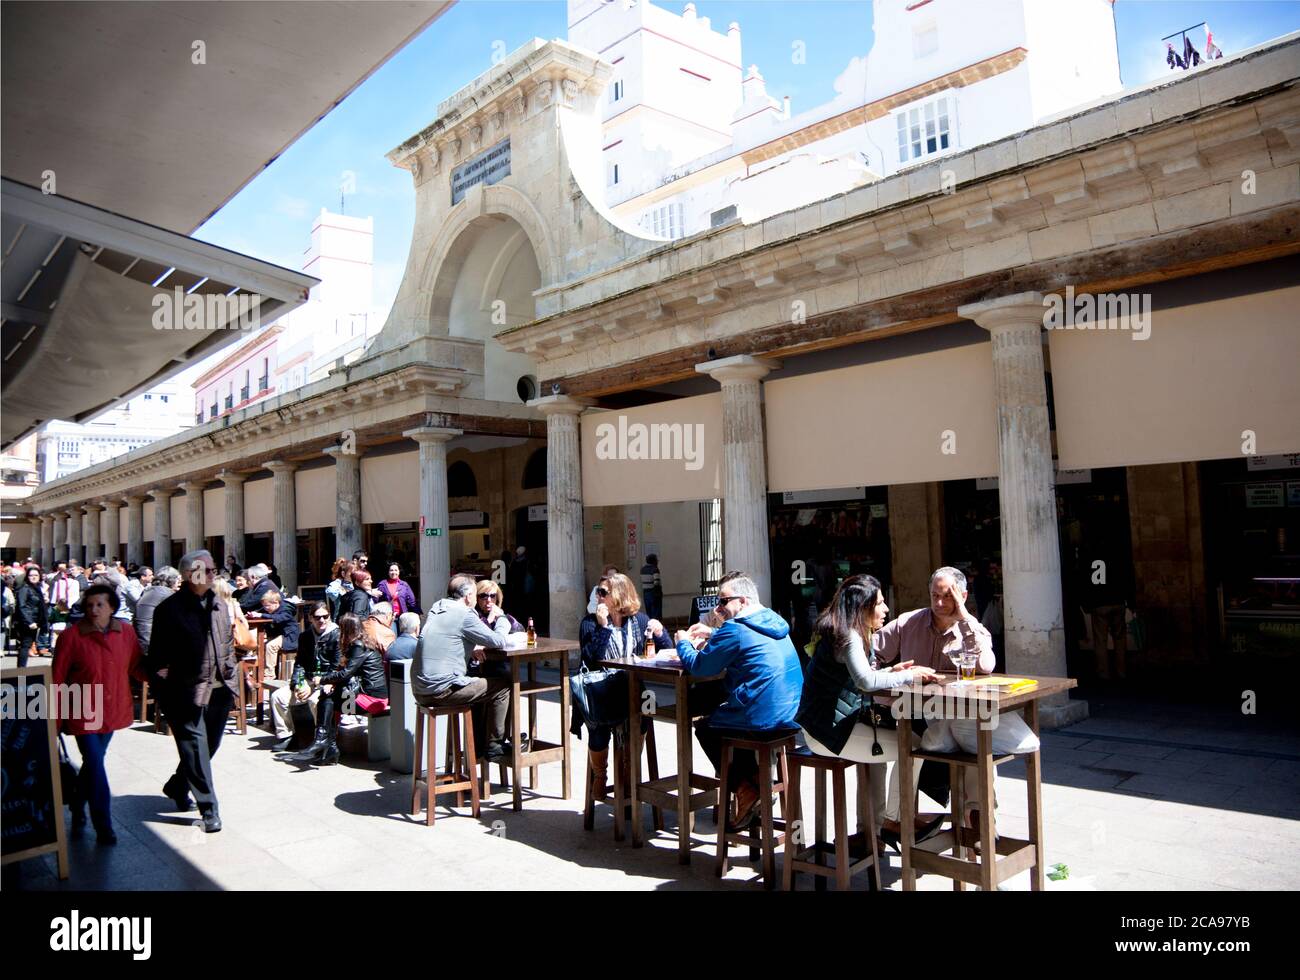 Visitors to the food market in Cadiz eating on tables and stools outdoors Stock Photo